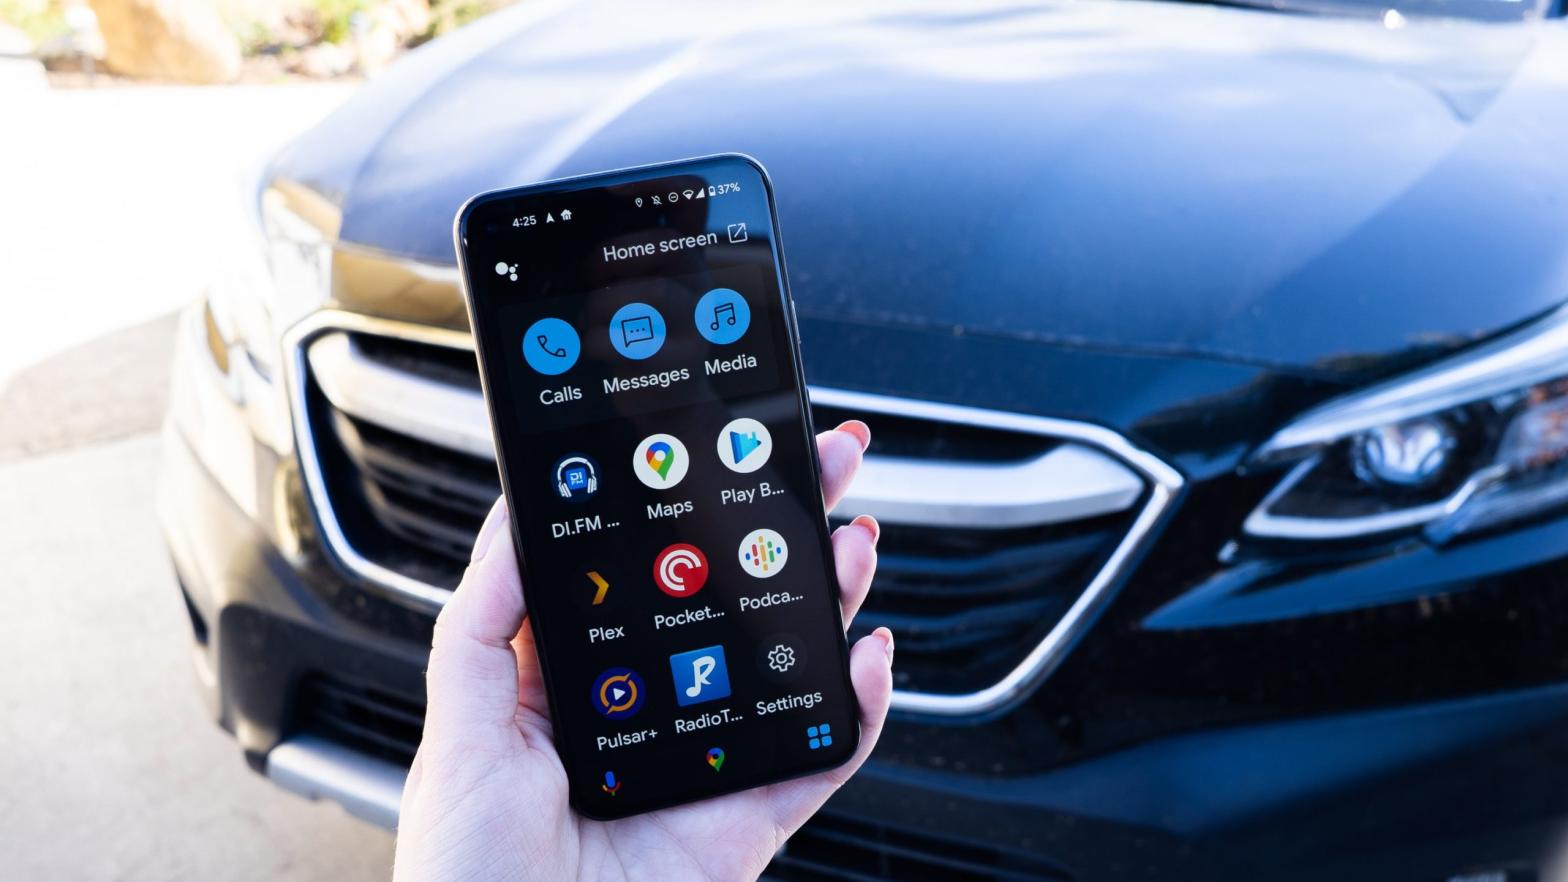 The new Assistant Driving Mode can help you get places without touching the screen while behind the wheel.  (Photo: Florence Ion / Gizmodo)